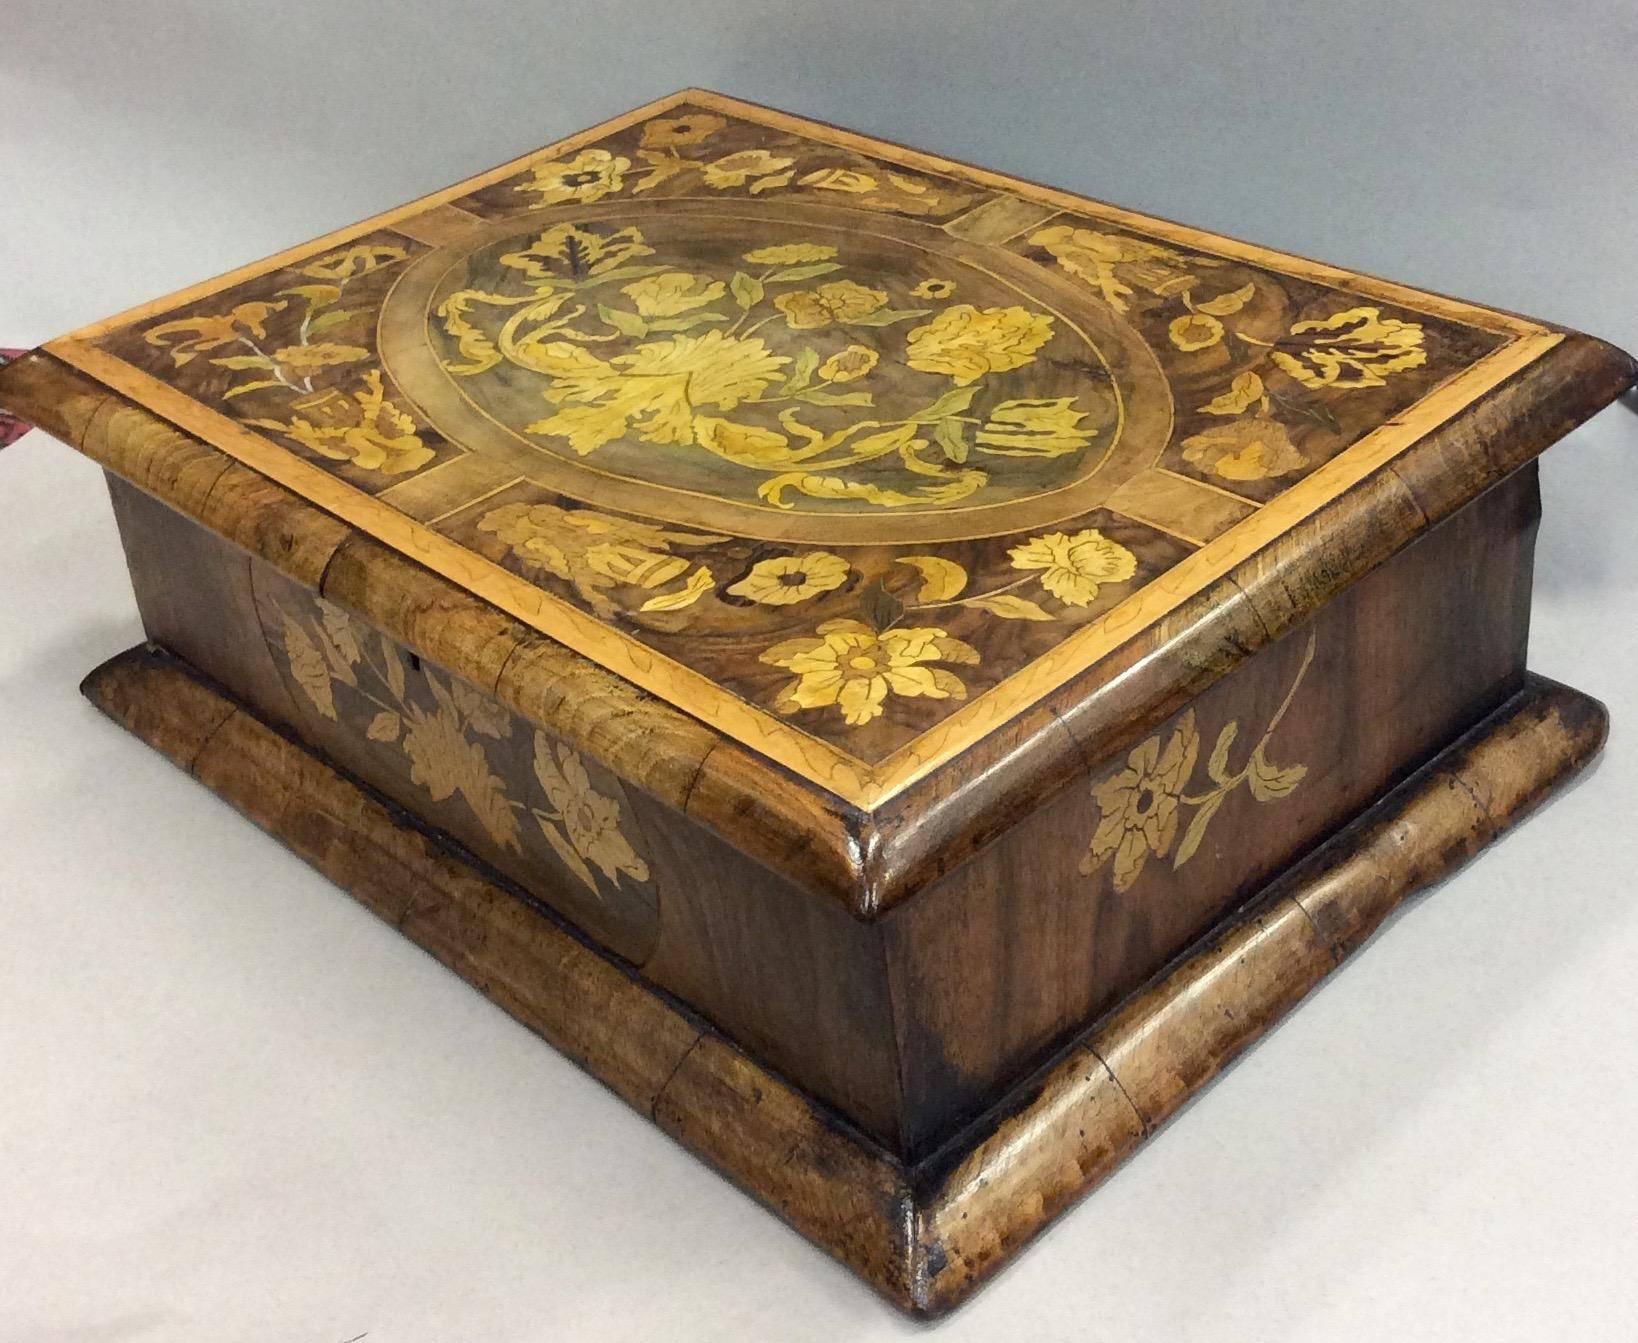 A wooden box made of thick panels decorated in floral marquetry. Once stained, the wood shows lighter contrasting designs set against a darker ground. The lid features a rectangle framing an ovular central design with bouquets fitting in the divides